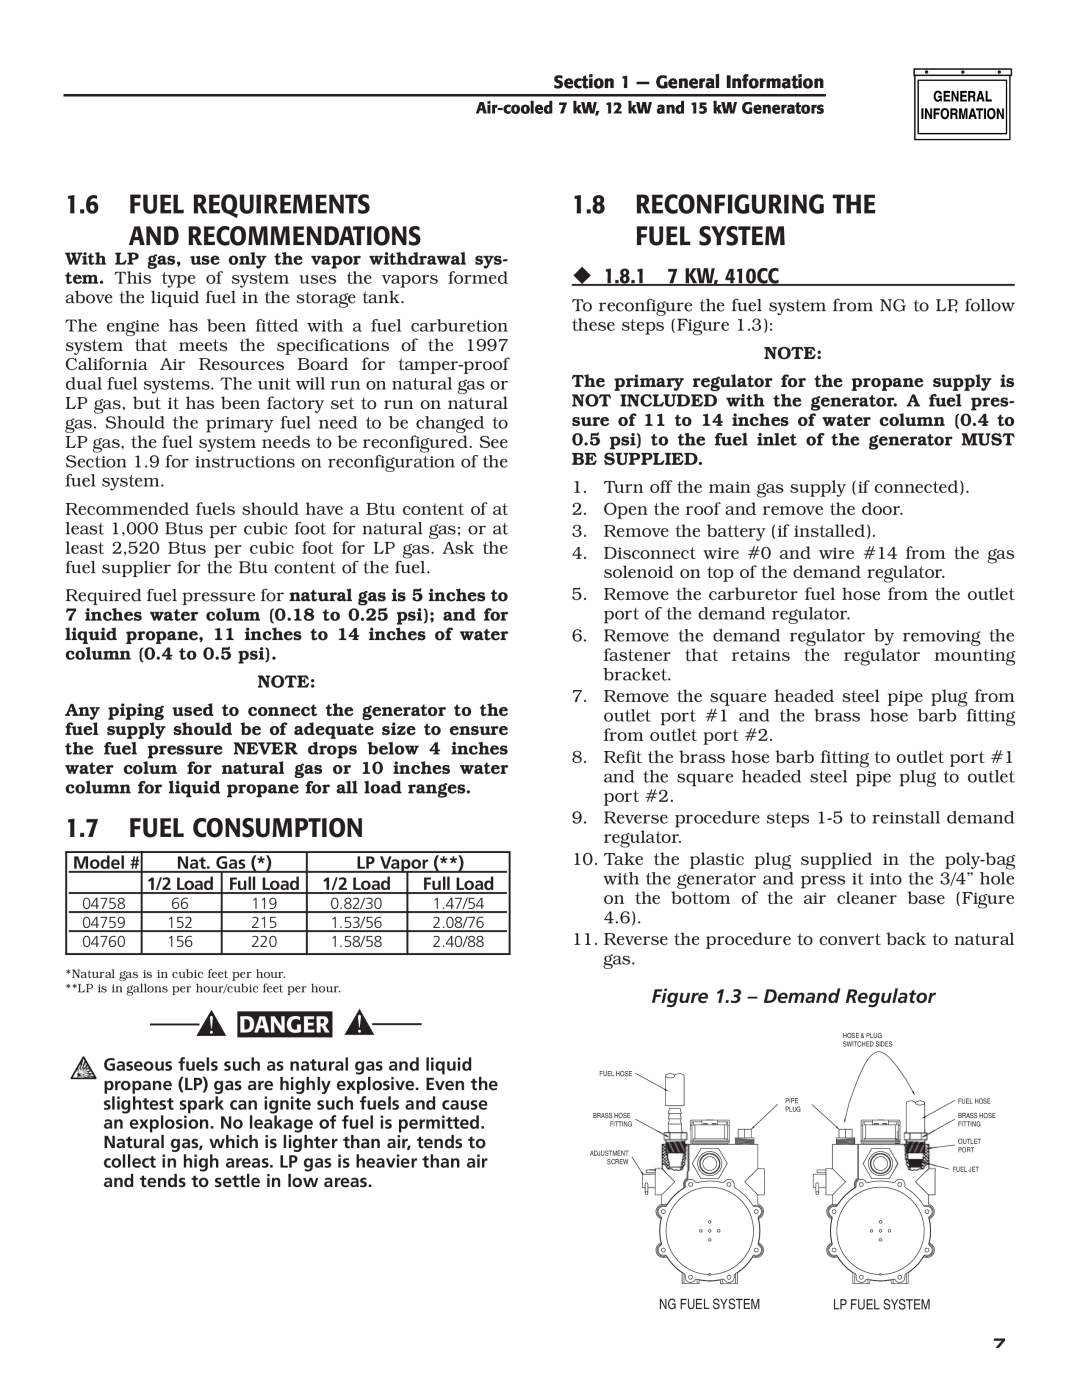 Guardian Technologies 04760-2 Fuel Requirements And Recommendations, Fuel Consumption, Reconfiguring The Fuel System 